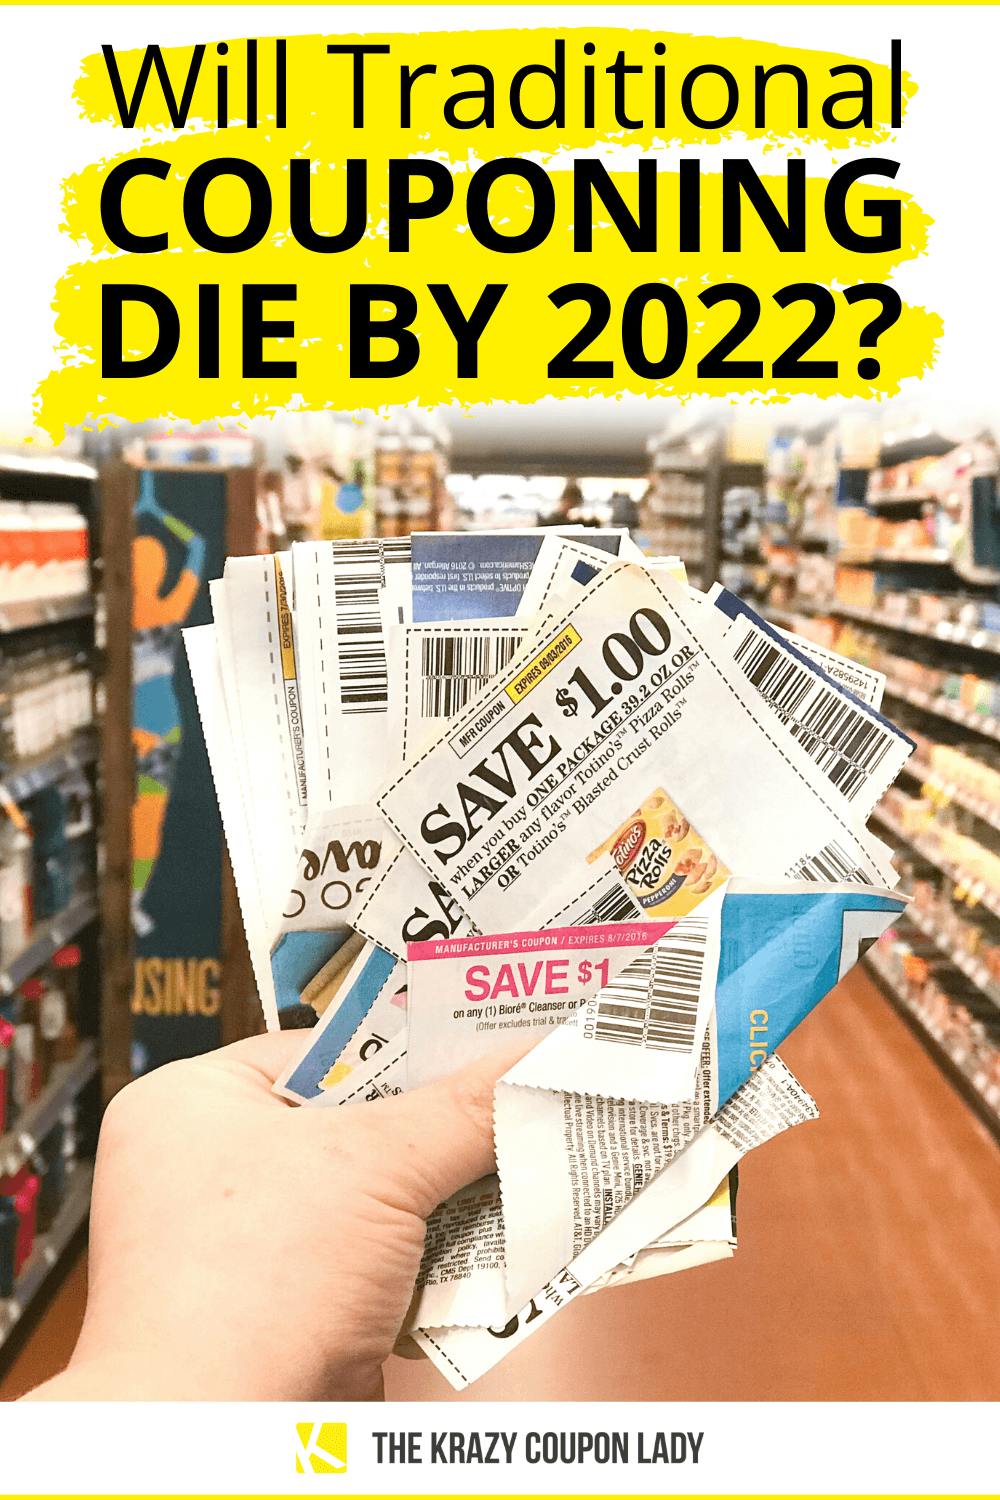 Coupons.com CEO Says Paper Coupons Will Die by 2022